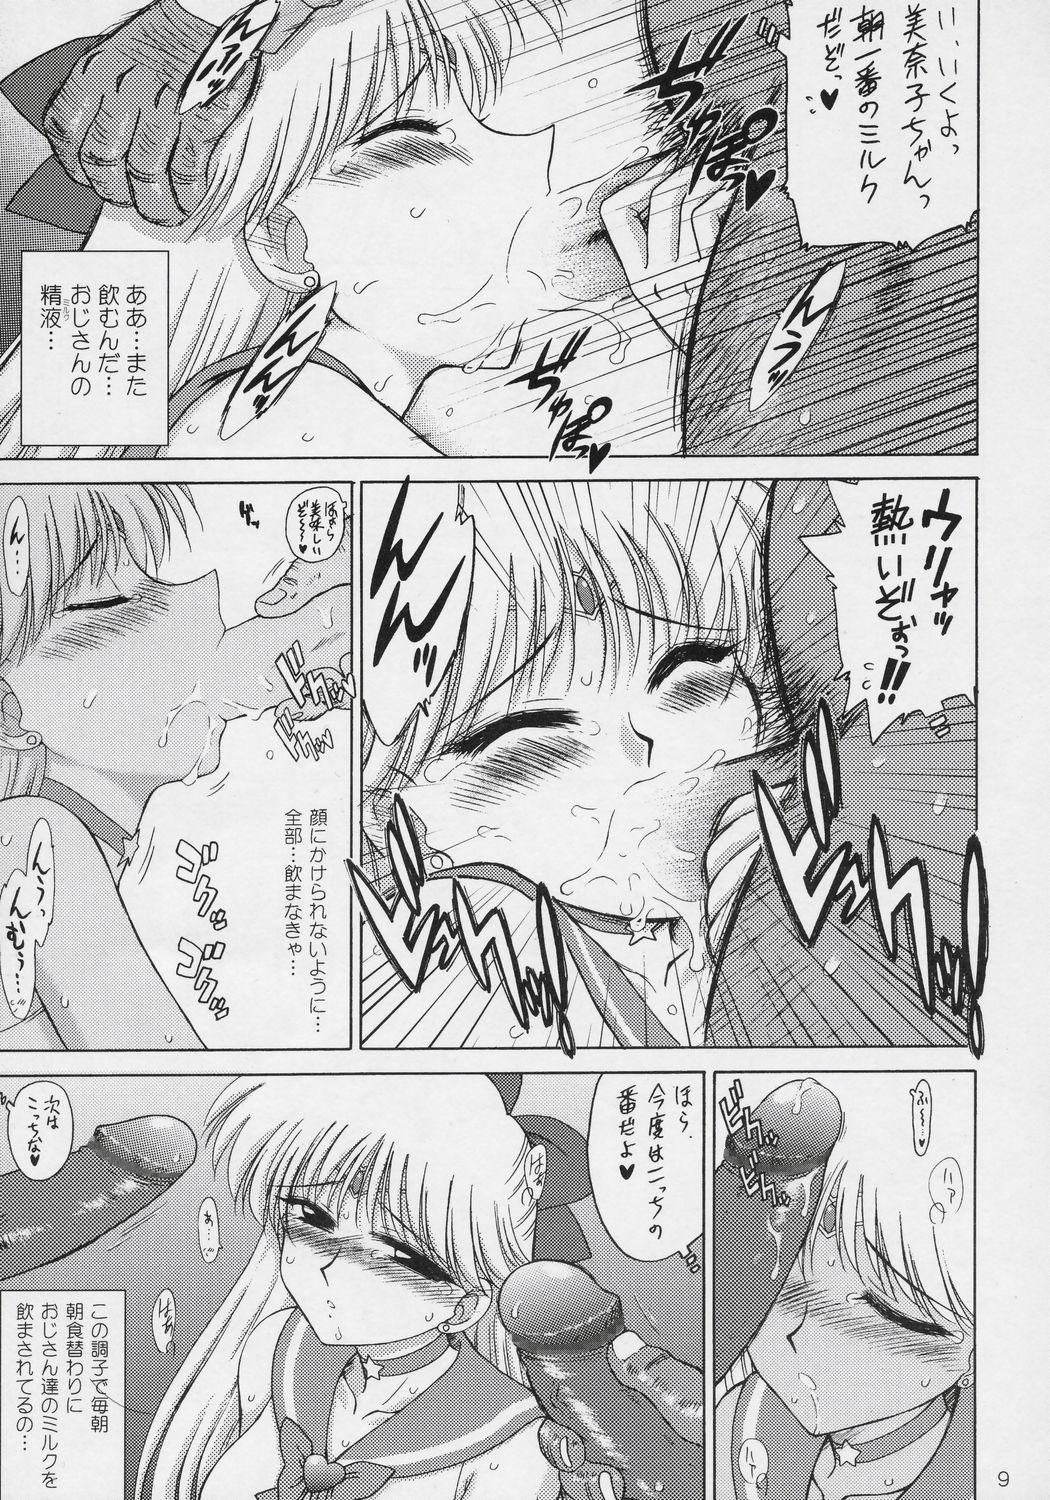 Pussy Play Super Fly - Sailor moon Bubble Butt - Page 8